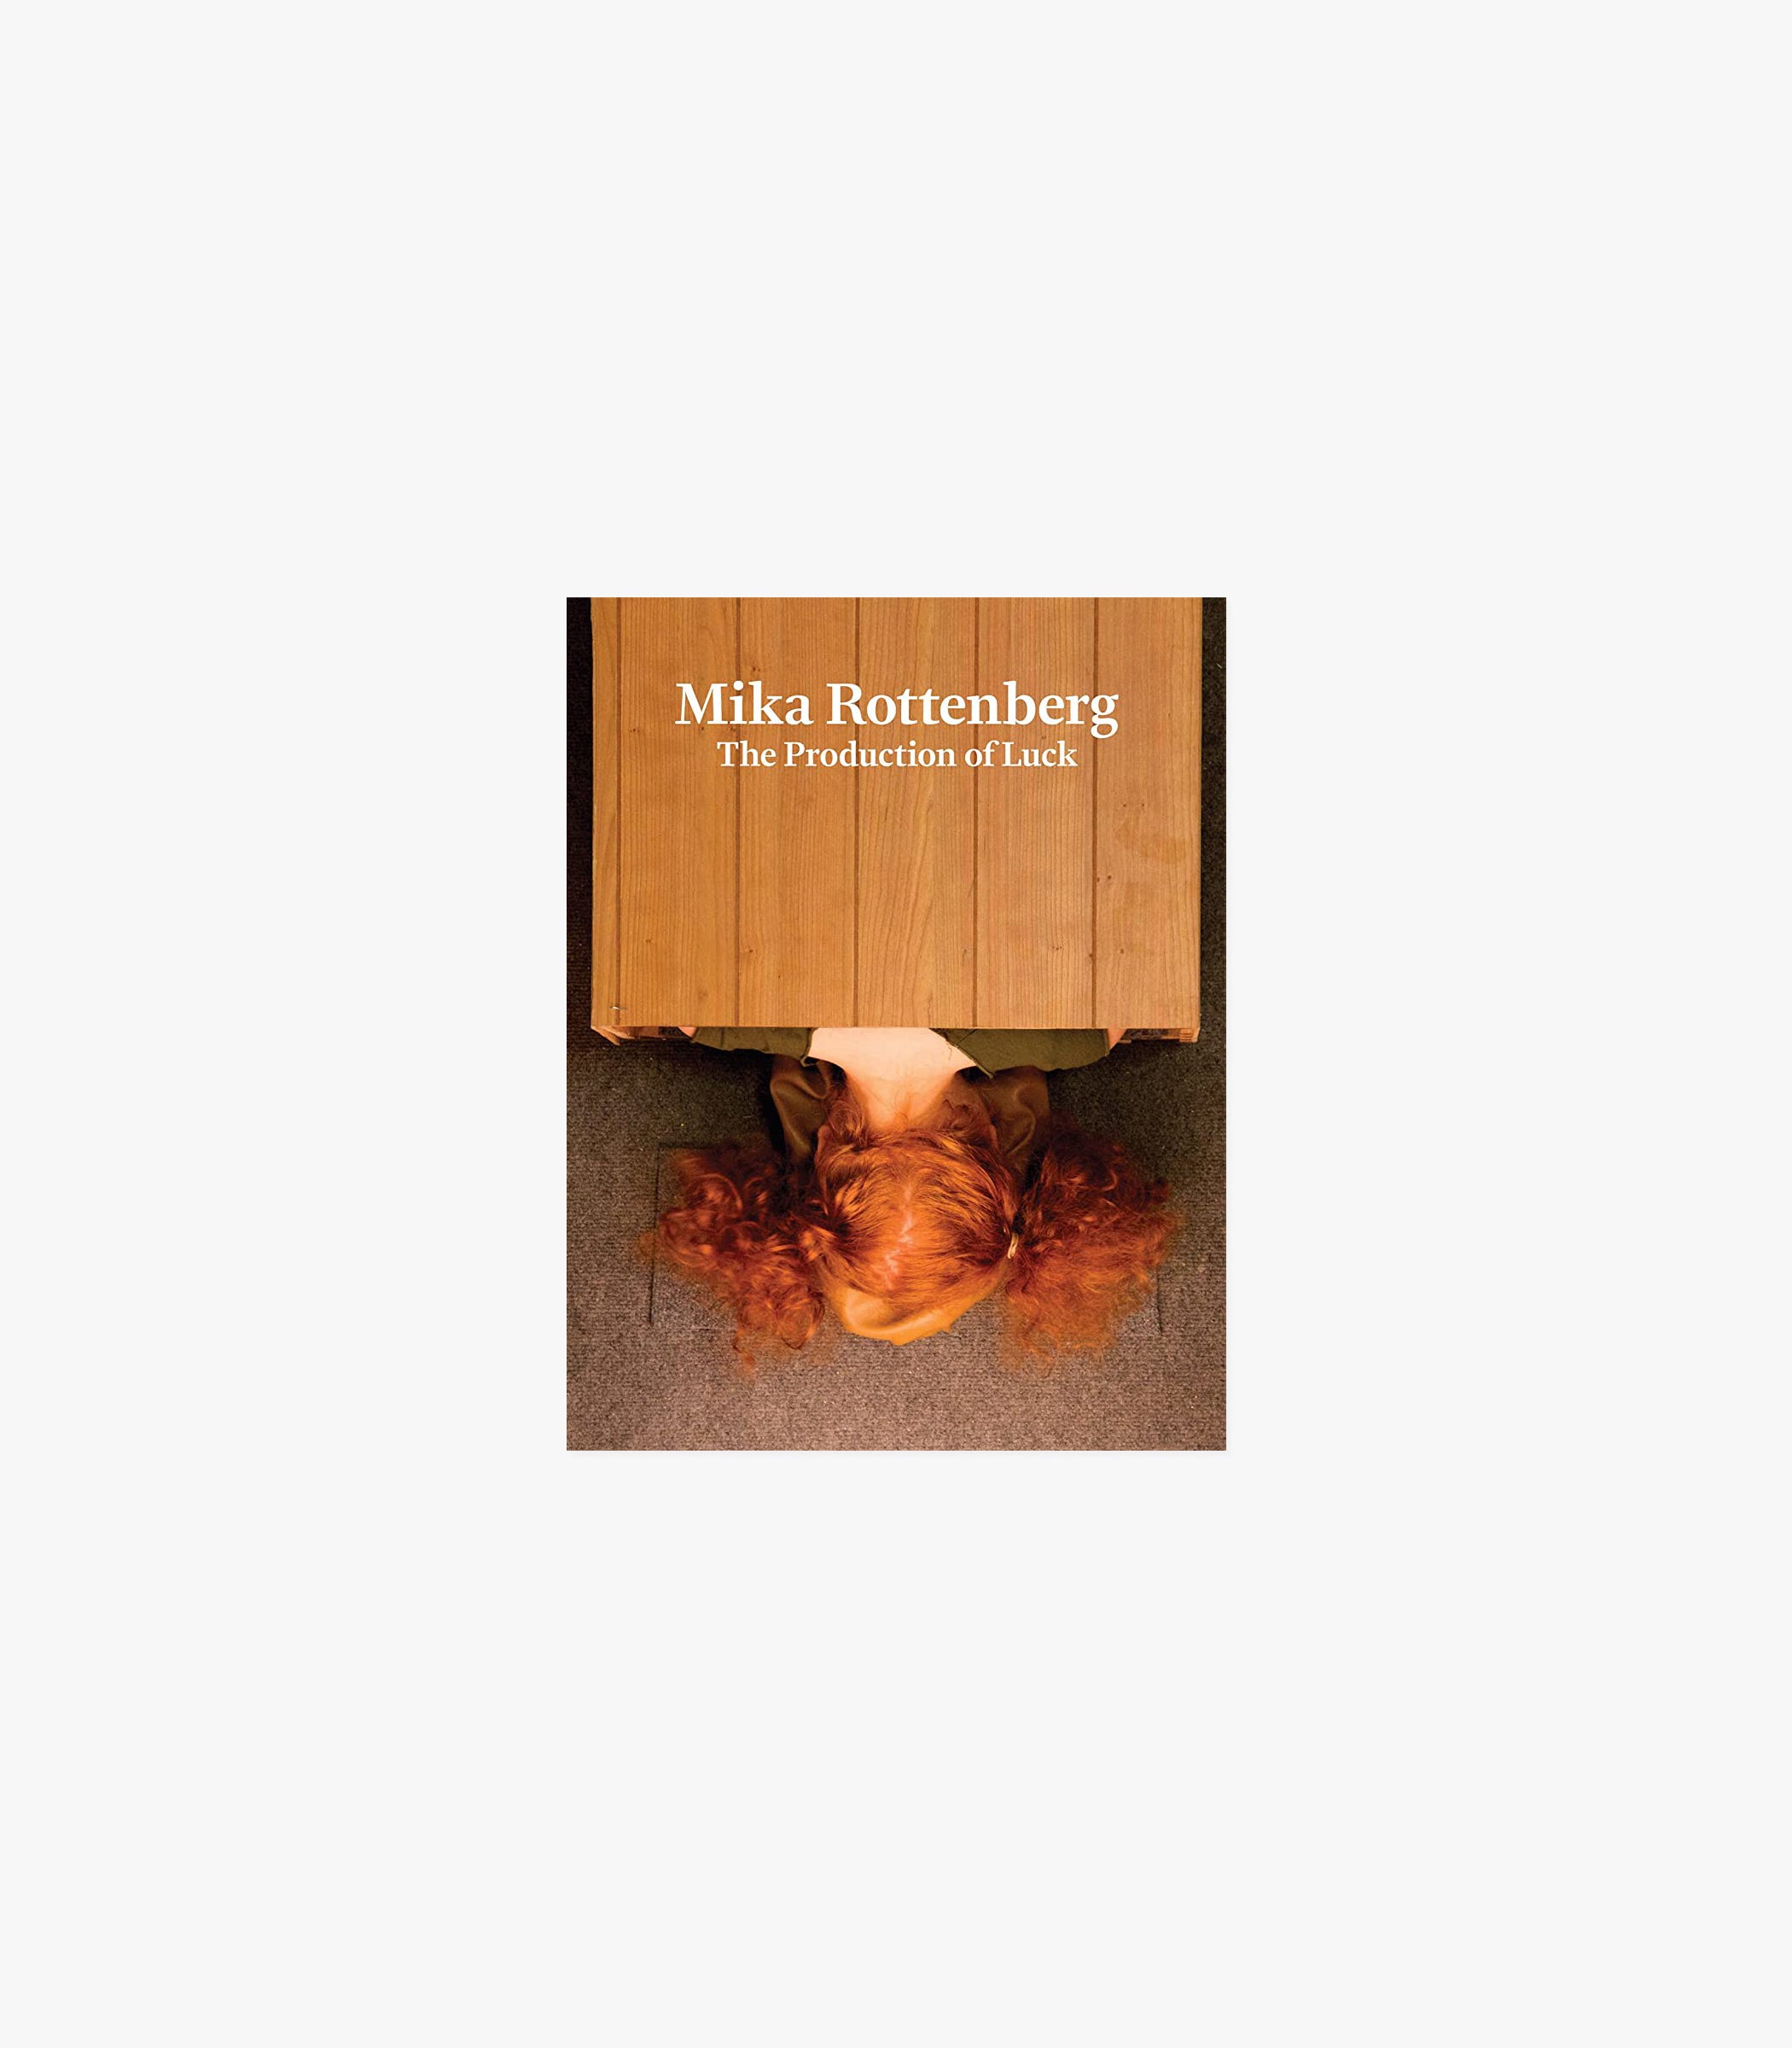 Mika Rottenberg: The Production of Luck